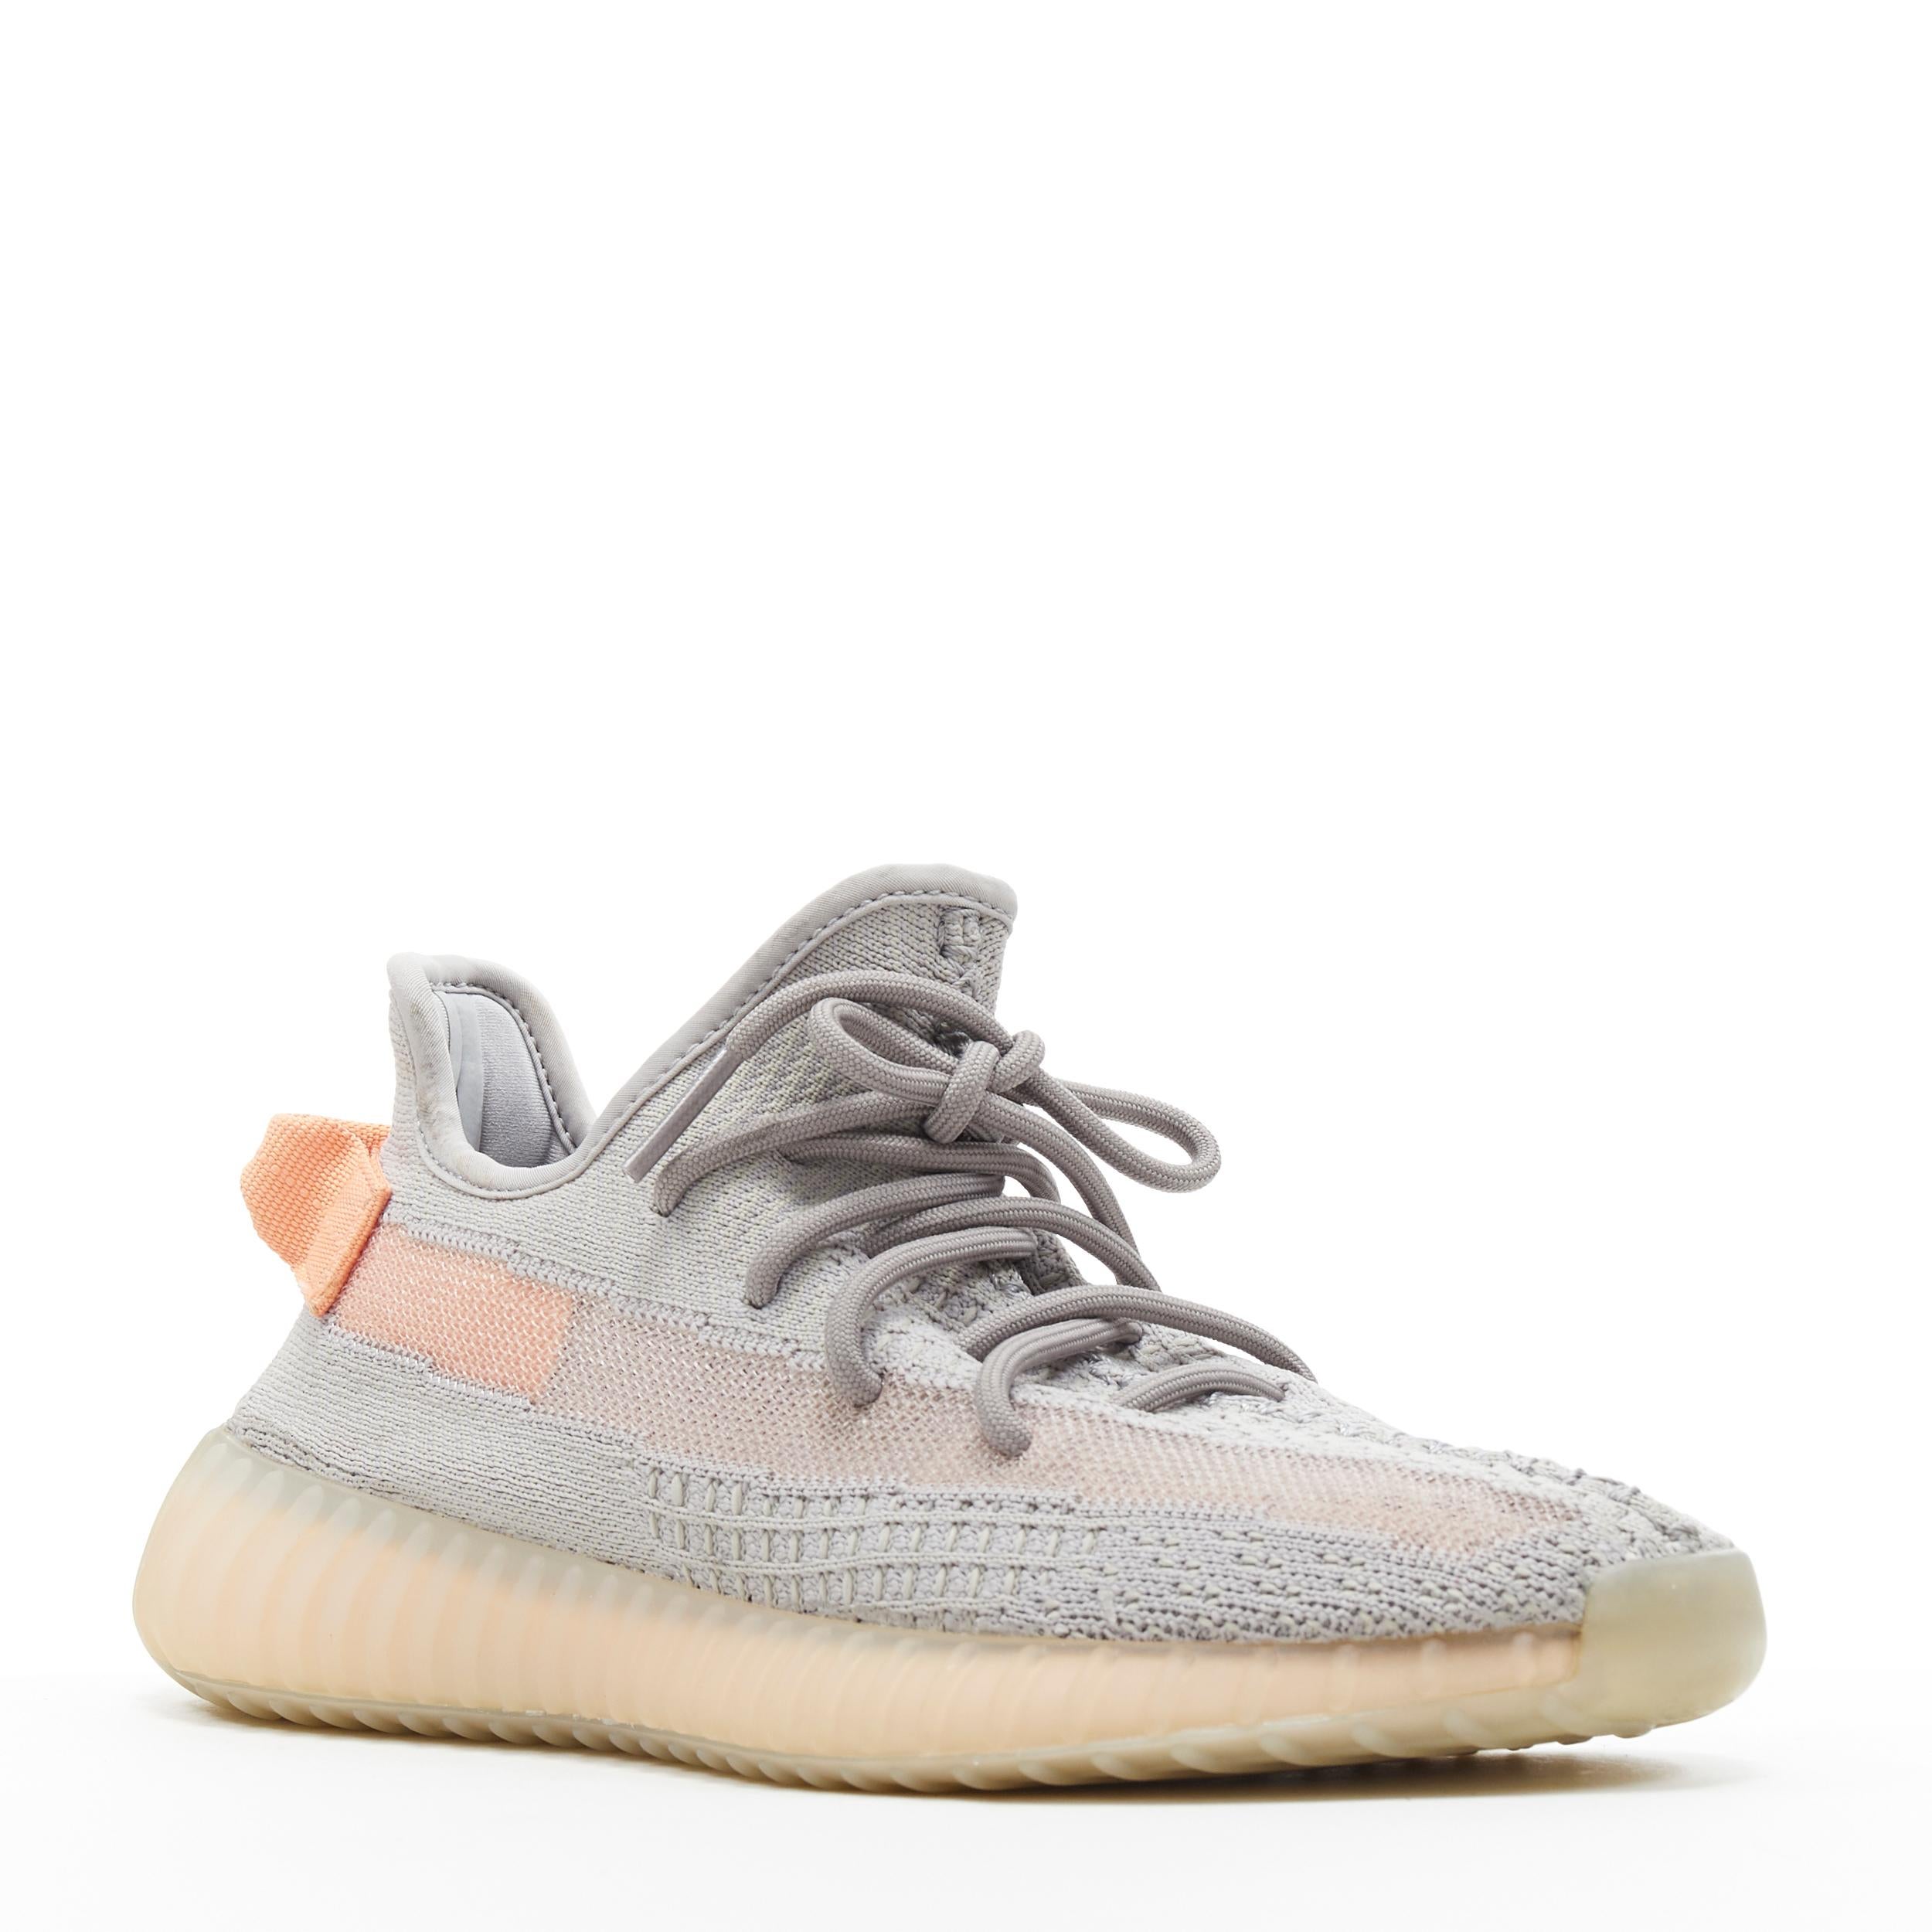 YEEZY 350 V2 Coconut grey peach orange sock knit sneakers upper Kanye Adidas US7
Brand: Yeezy
Designer: Kanye West
Model Name / Style: Yeezy 350 V2
Material: Fabric
Color: Grey
Pattern: Solid
Extra Detail: Yeezy 350 V2 Coconut colorway. Low (1-1.9